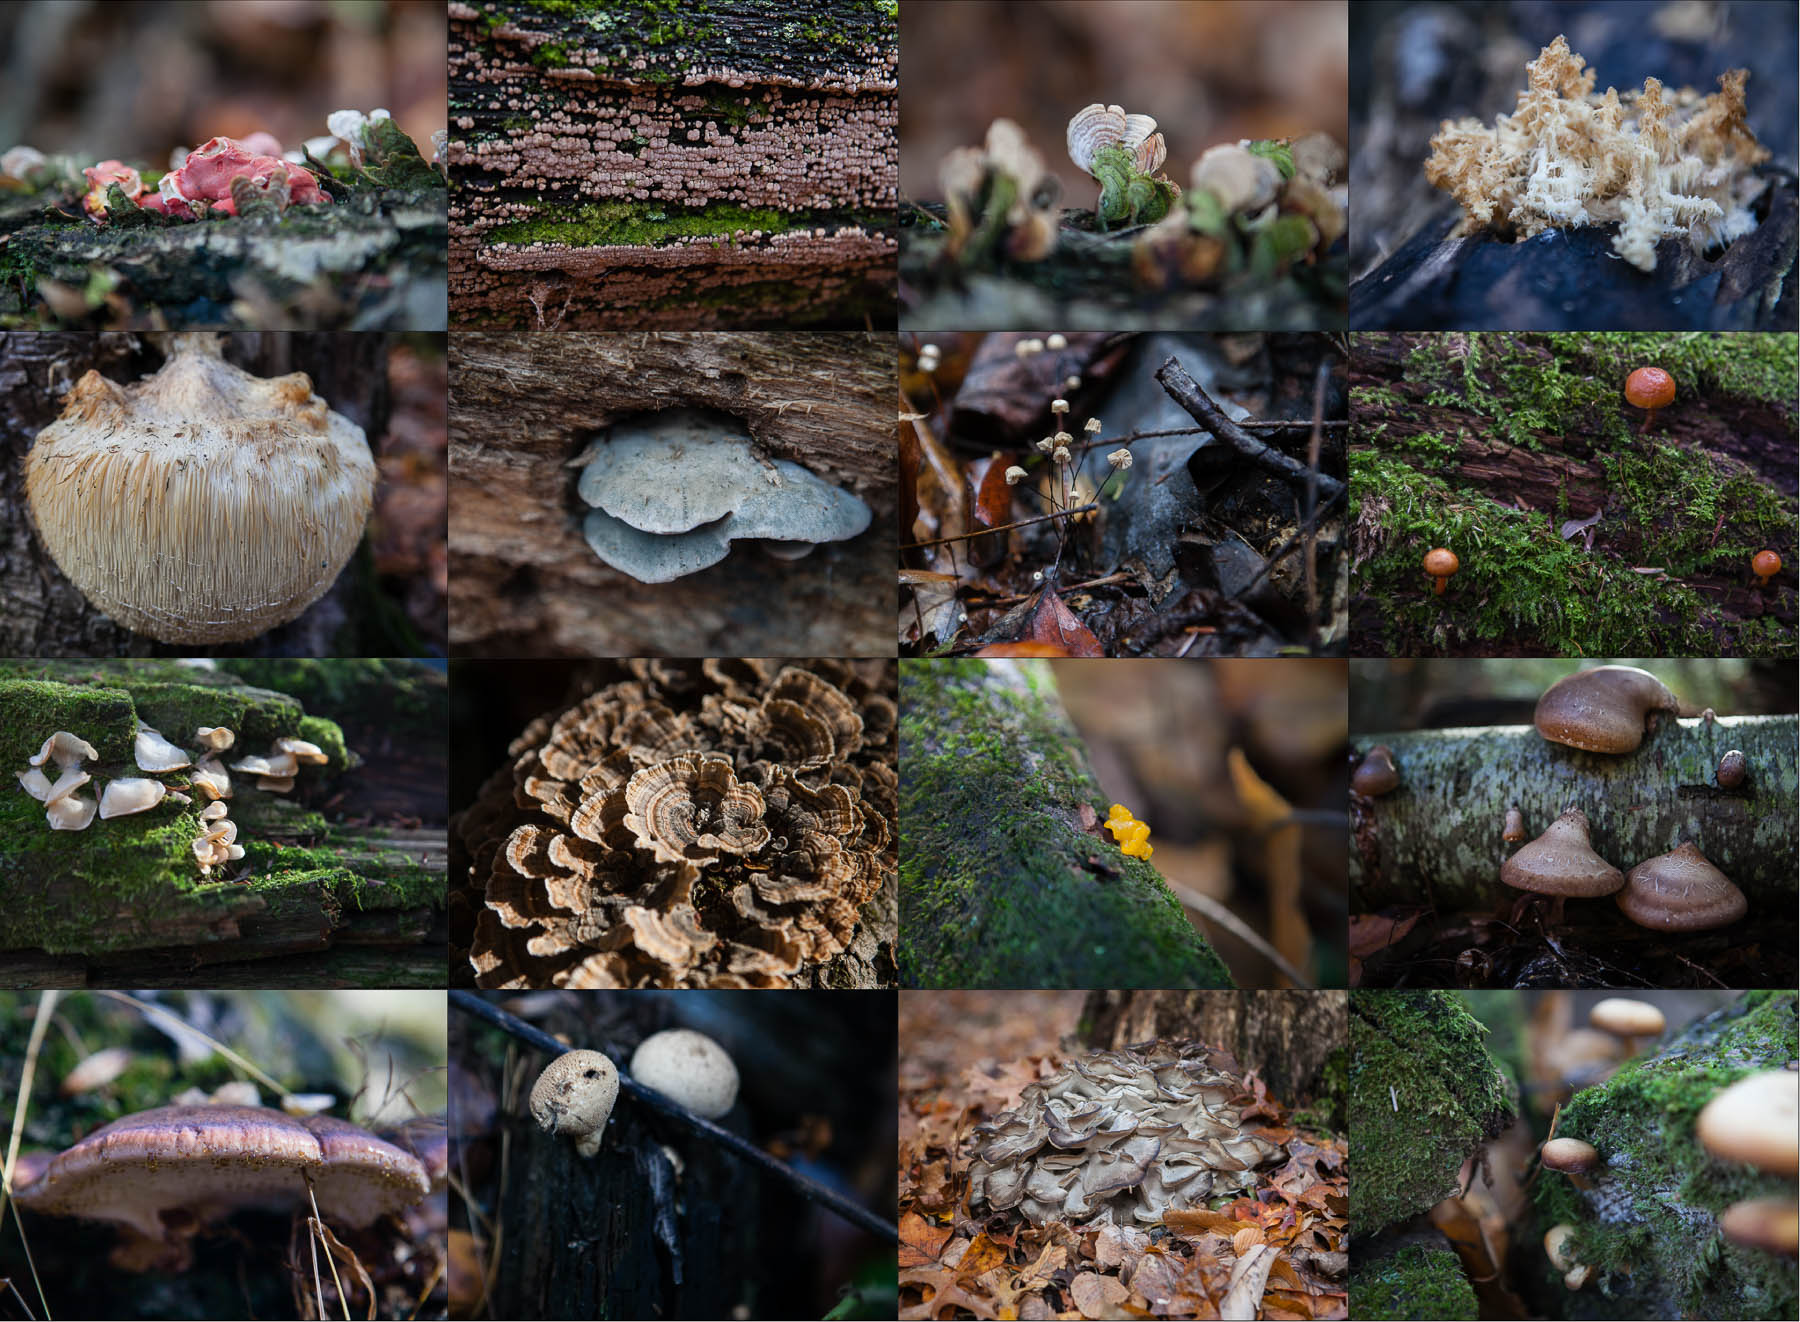 Discovering the hidden world of forest fungi | Chesapeake Bay Program